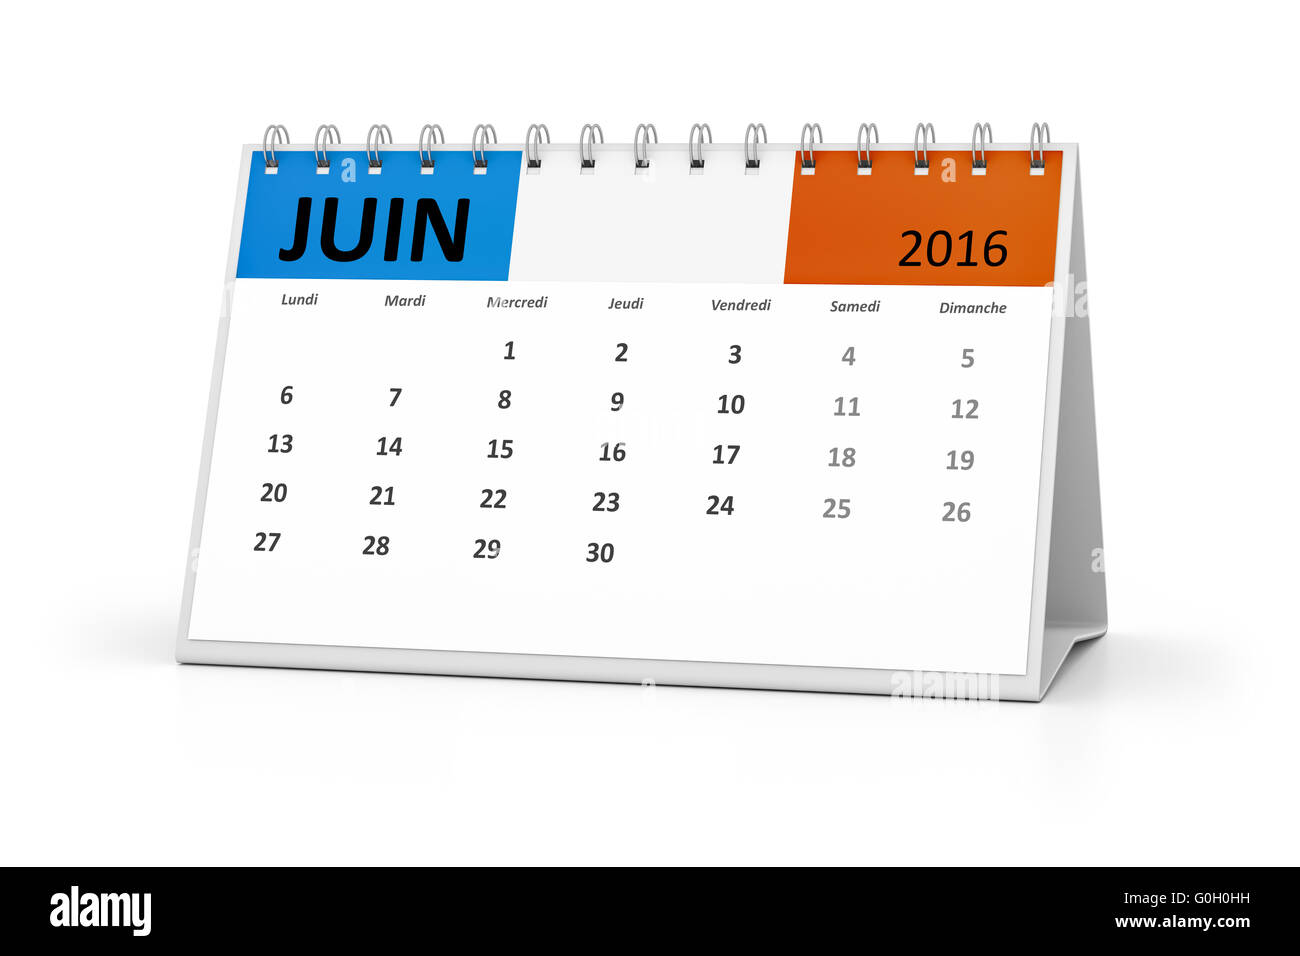 french language table calendar 2016 june Stock Photo